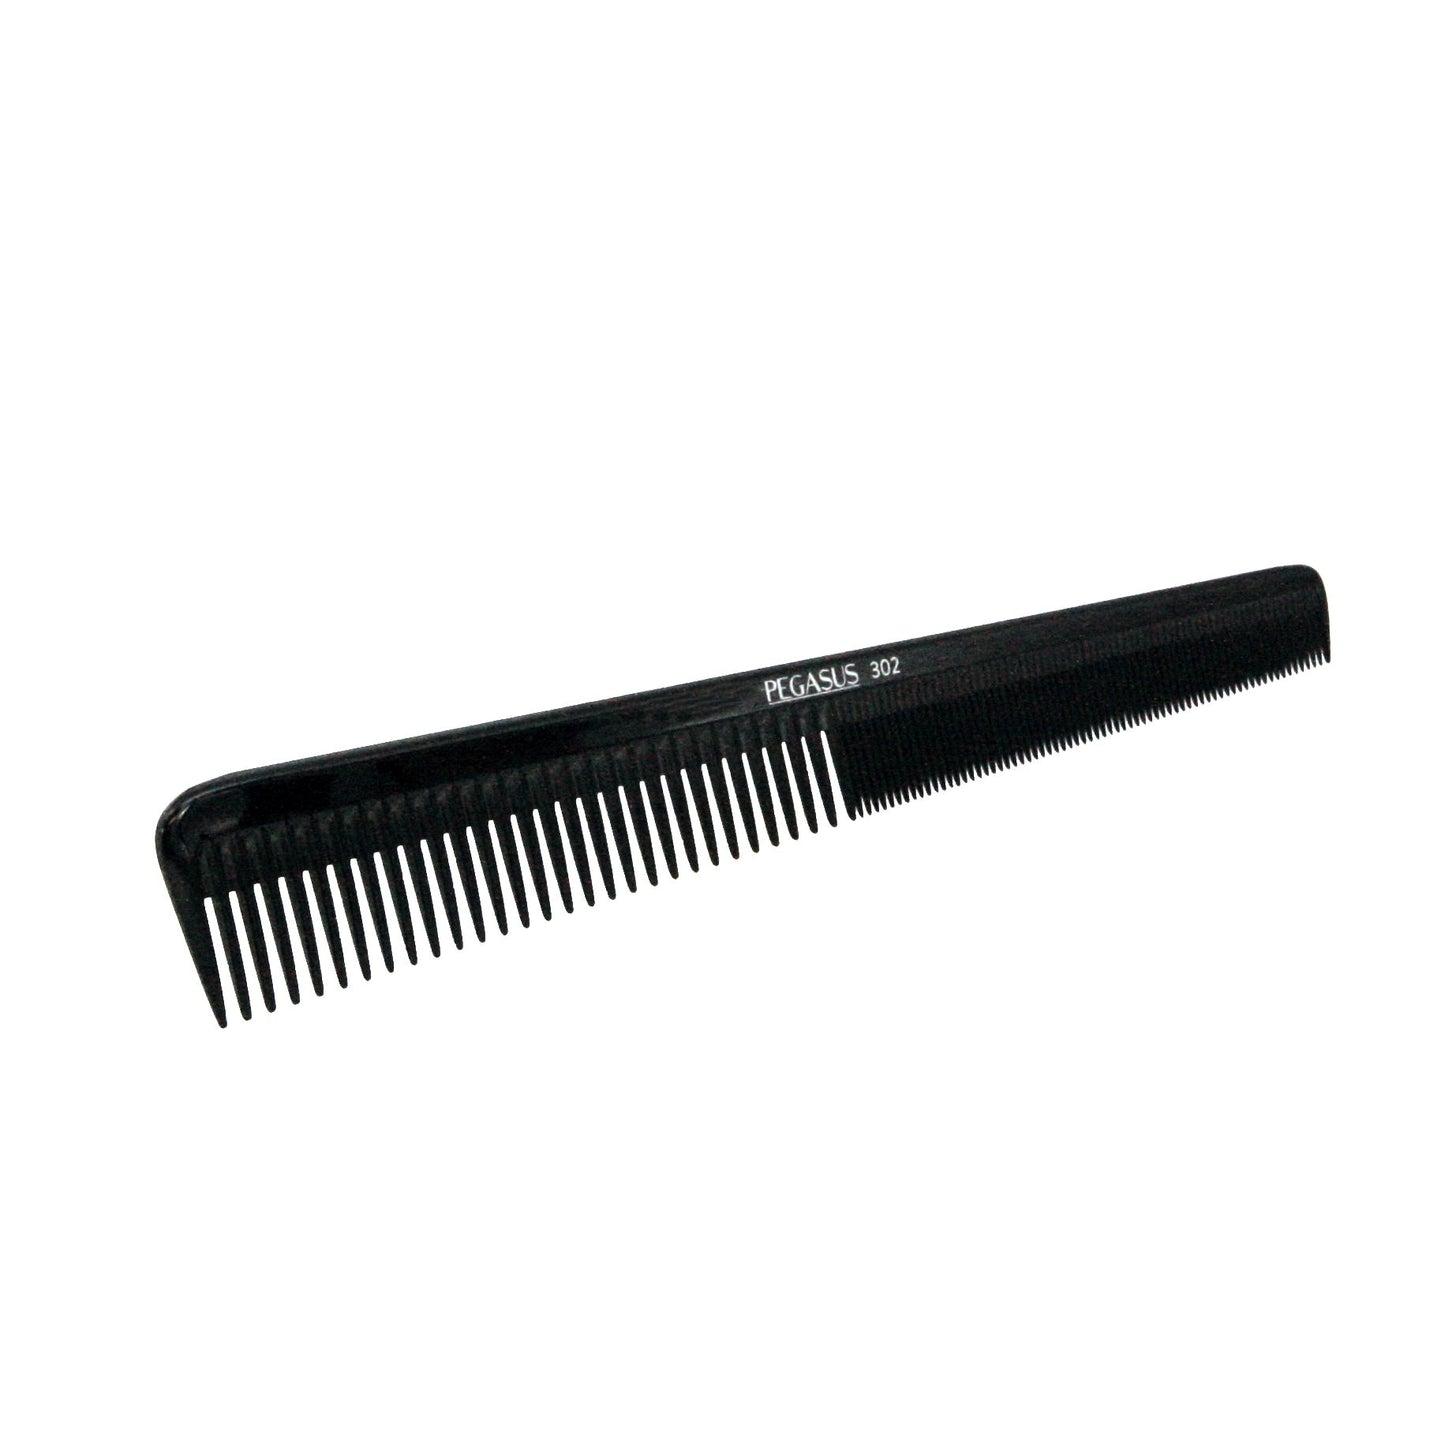 Pegasus 302, 7in Hard Rubber Barber Comb with Extra Fine Teeth, Seamless, Smooth Edges, Anti Static, Heat and Chemically Resistant, Wet Hair, Everyday Grooming Comb | Peines de goma dura - Black